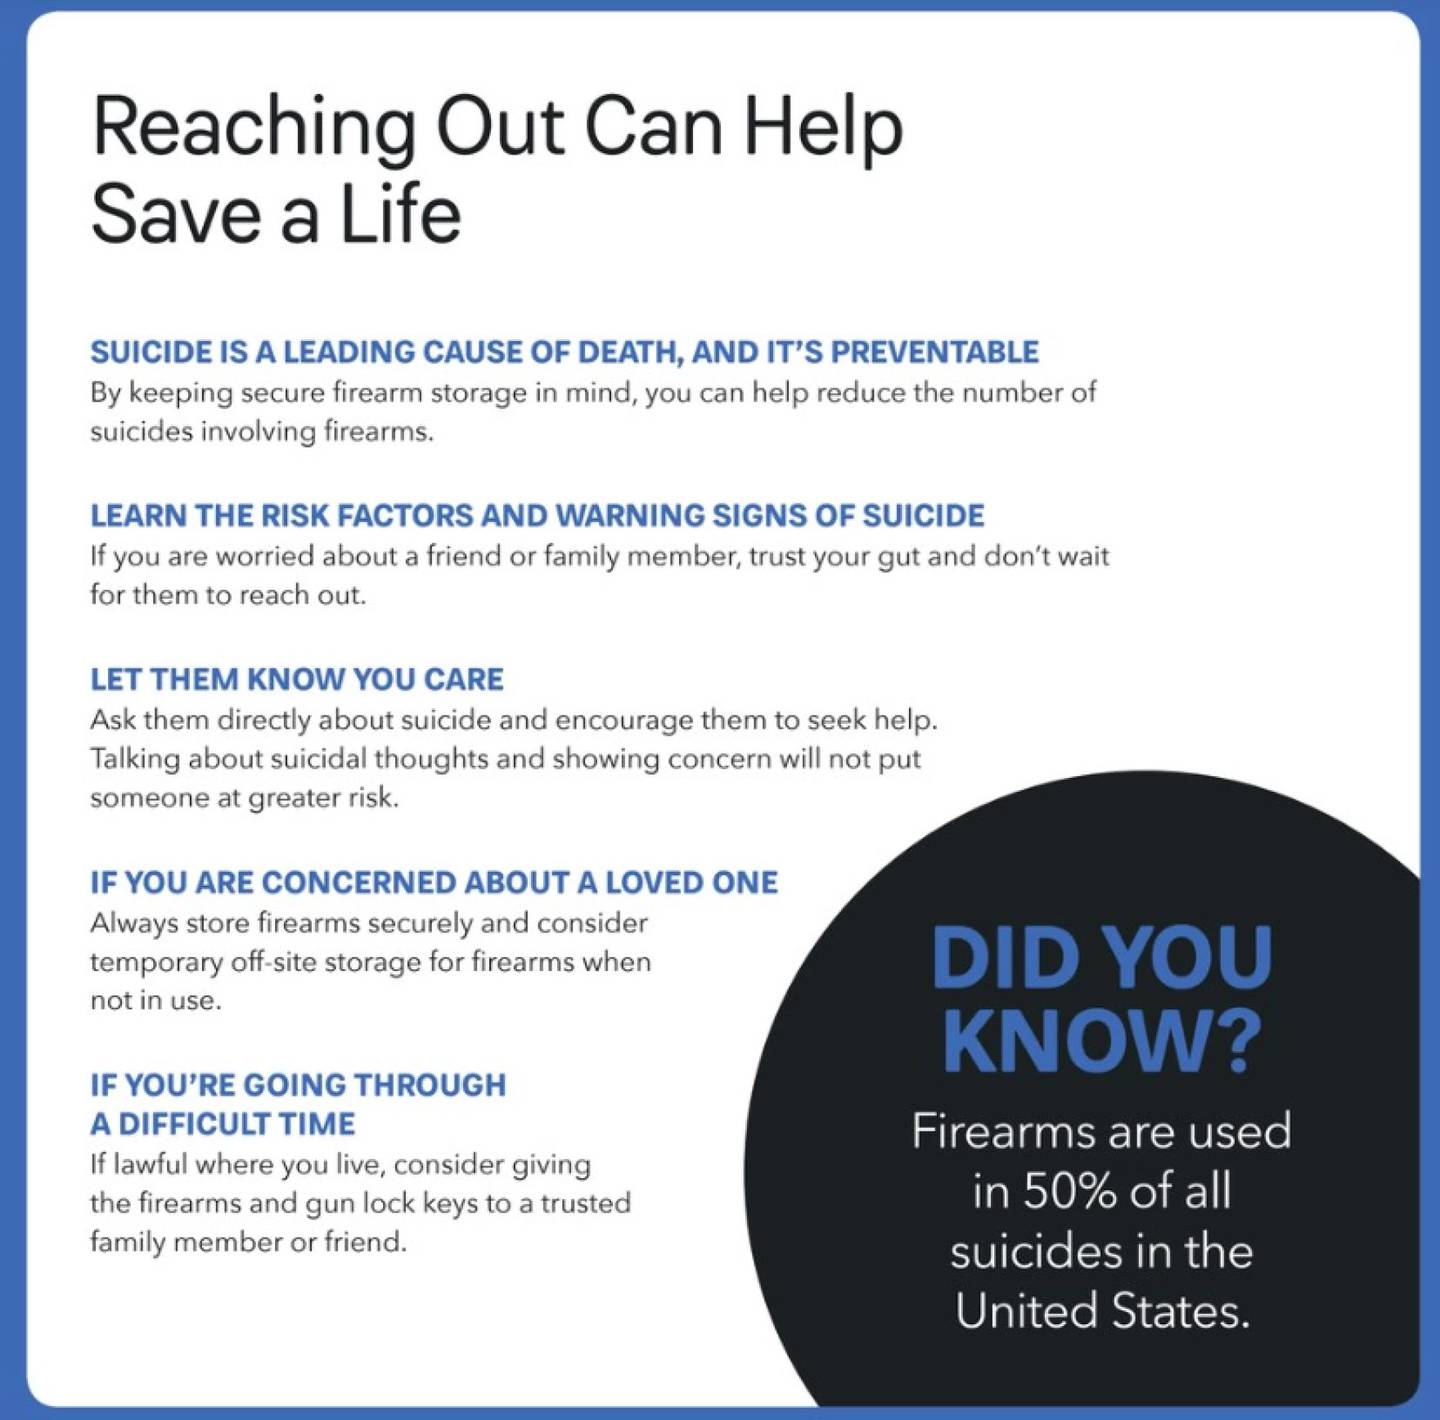 Part of the suicide prevention pamphlet from Anne Arundel County